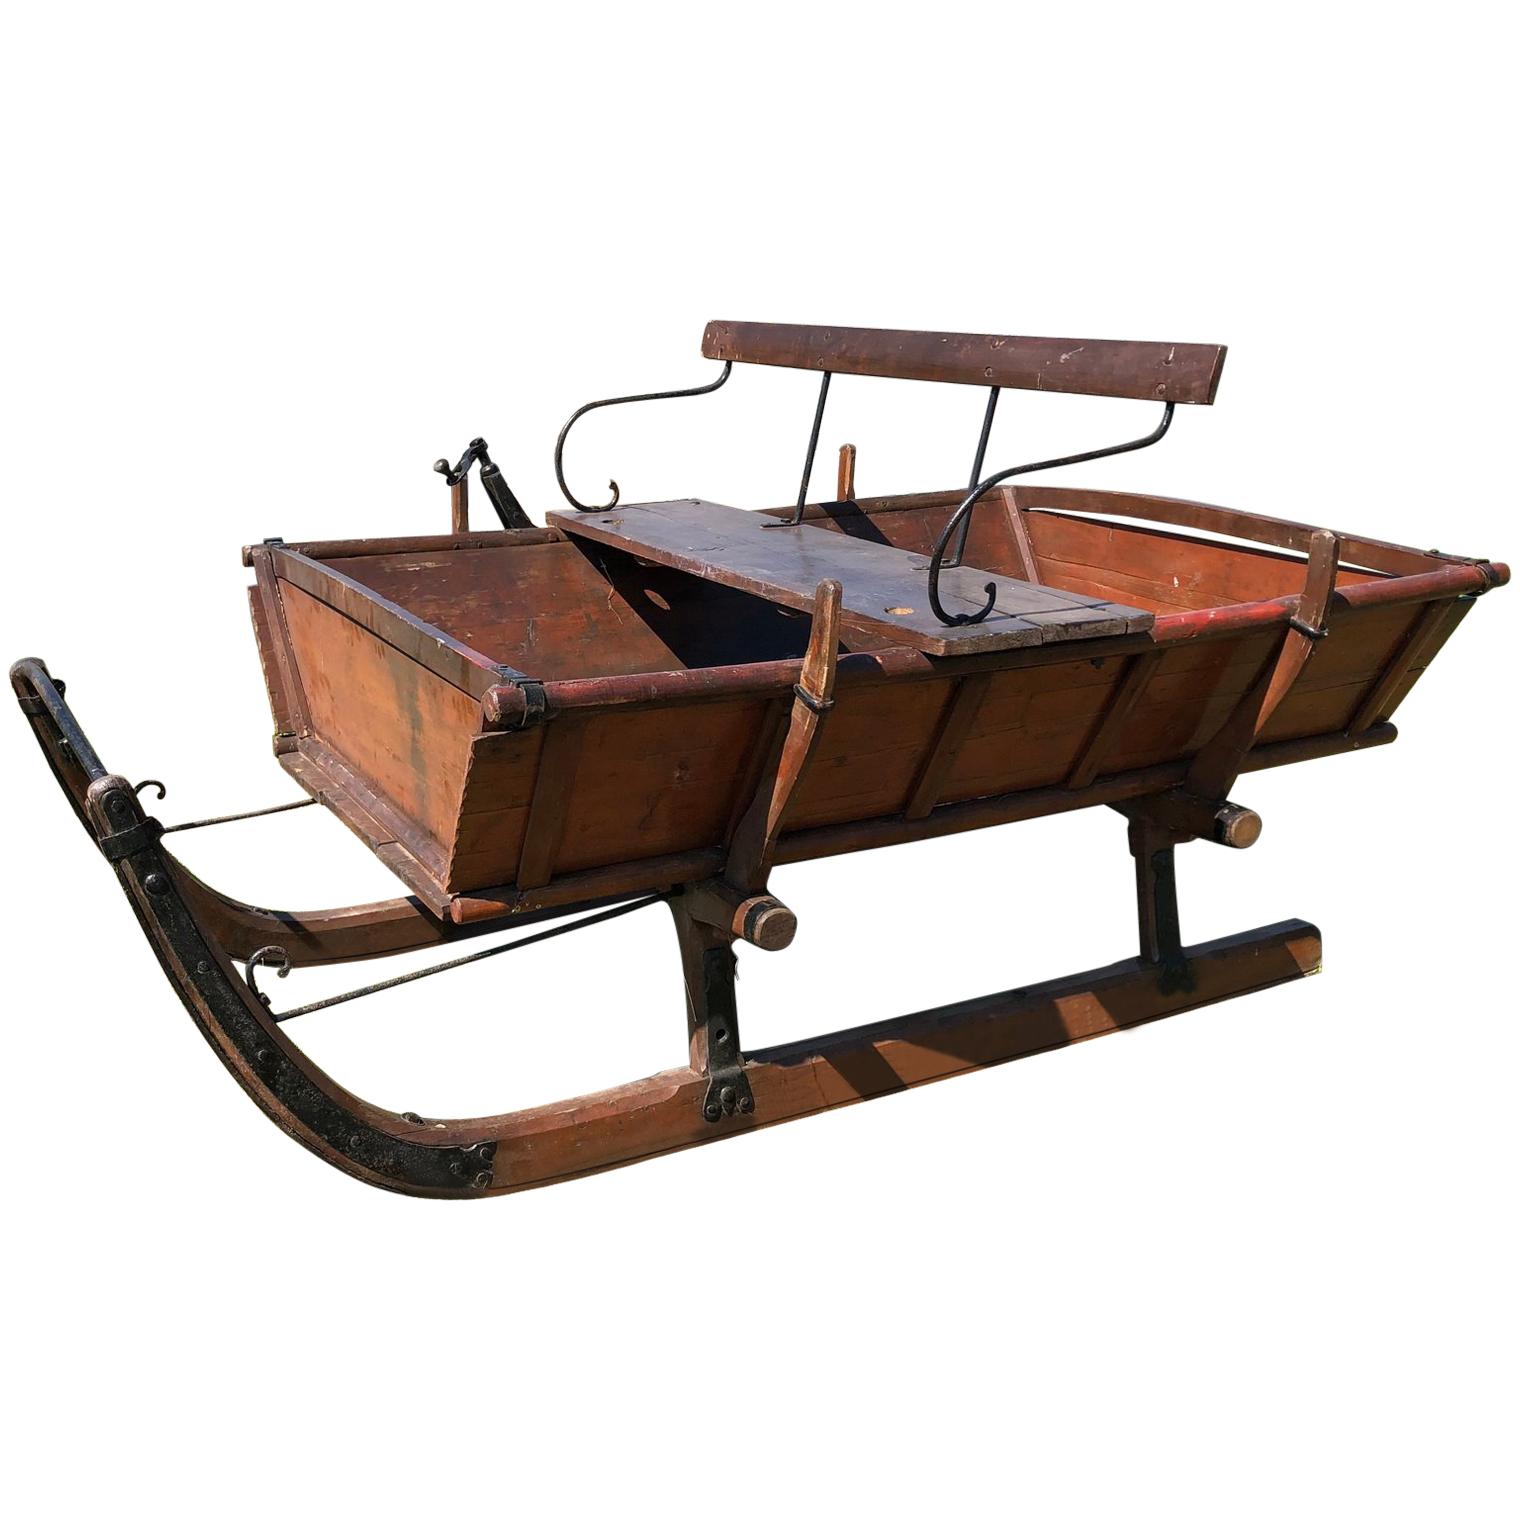 Antique Tyrolean Sleigh or Snow Sledge For Sale